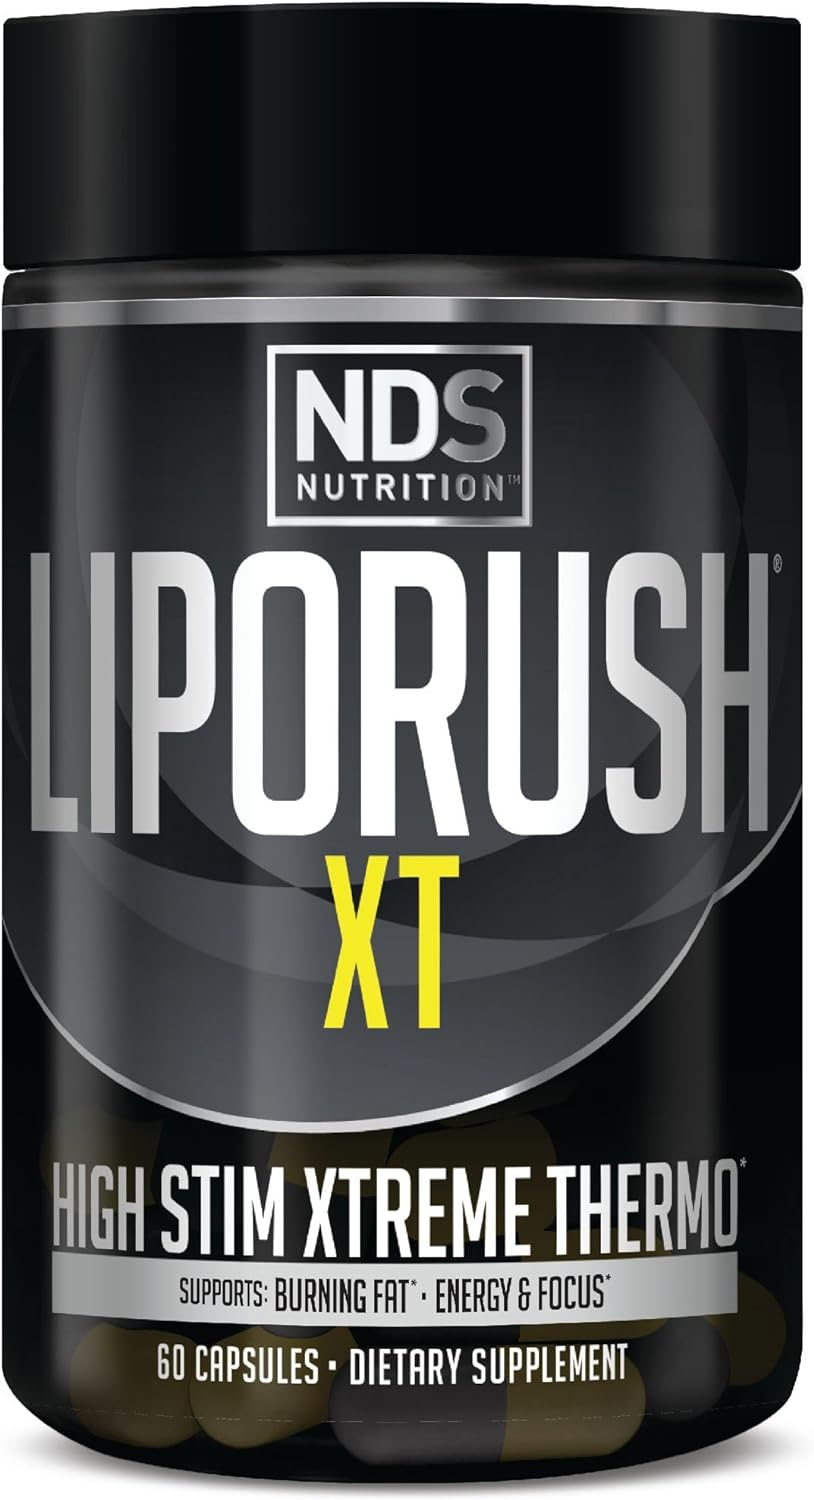 LIPORUSH NDS Nutrition XT - Super Concentrated Thermogenic with L-Carnitine  Teacrine for Shredding Fat - Supports Maximum Energy, Focus, Calorie Burning, Diuretic, Appetite Control (60 Capsules)